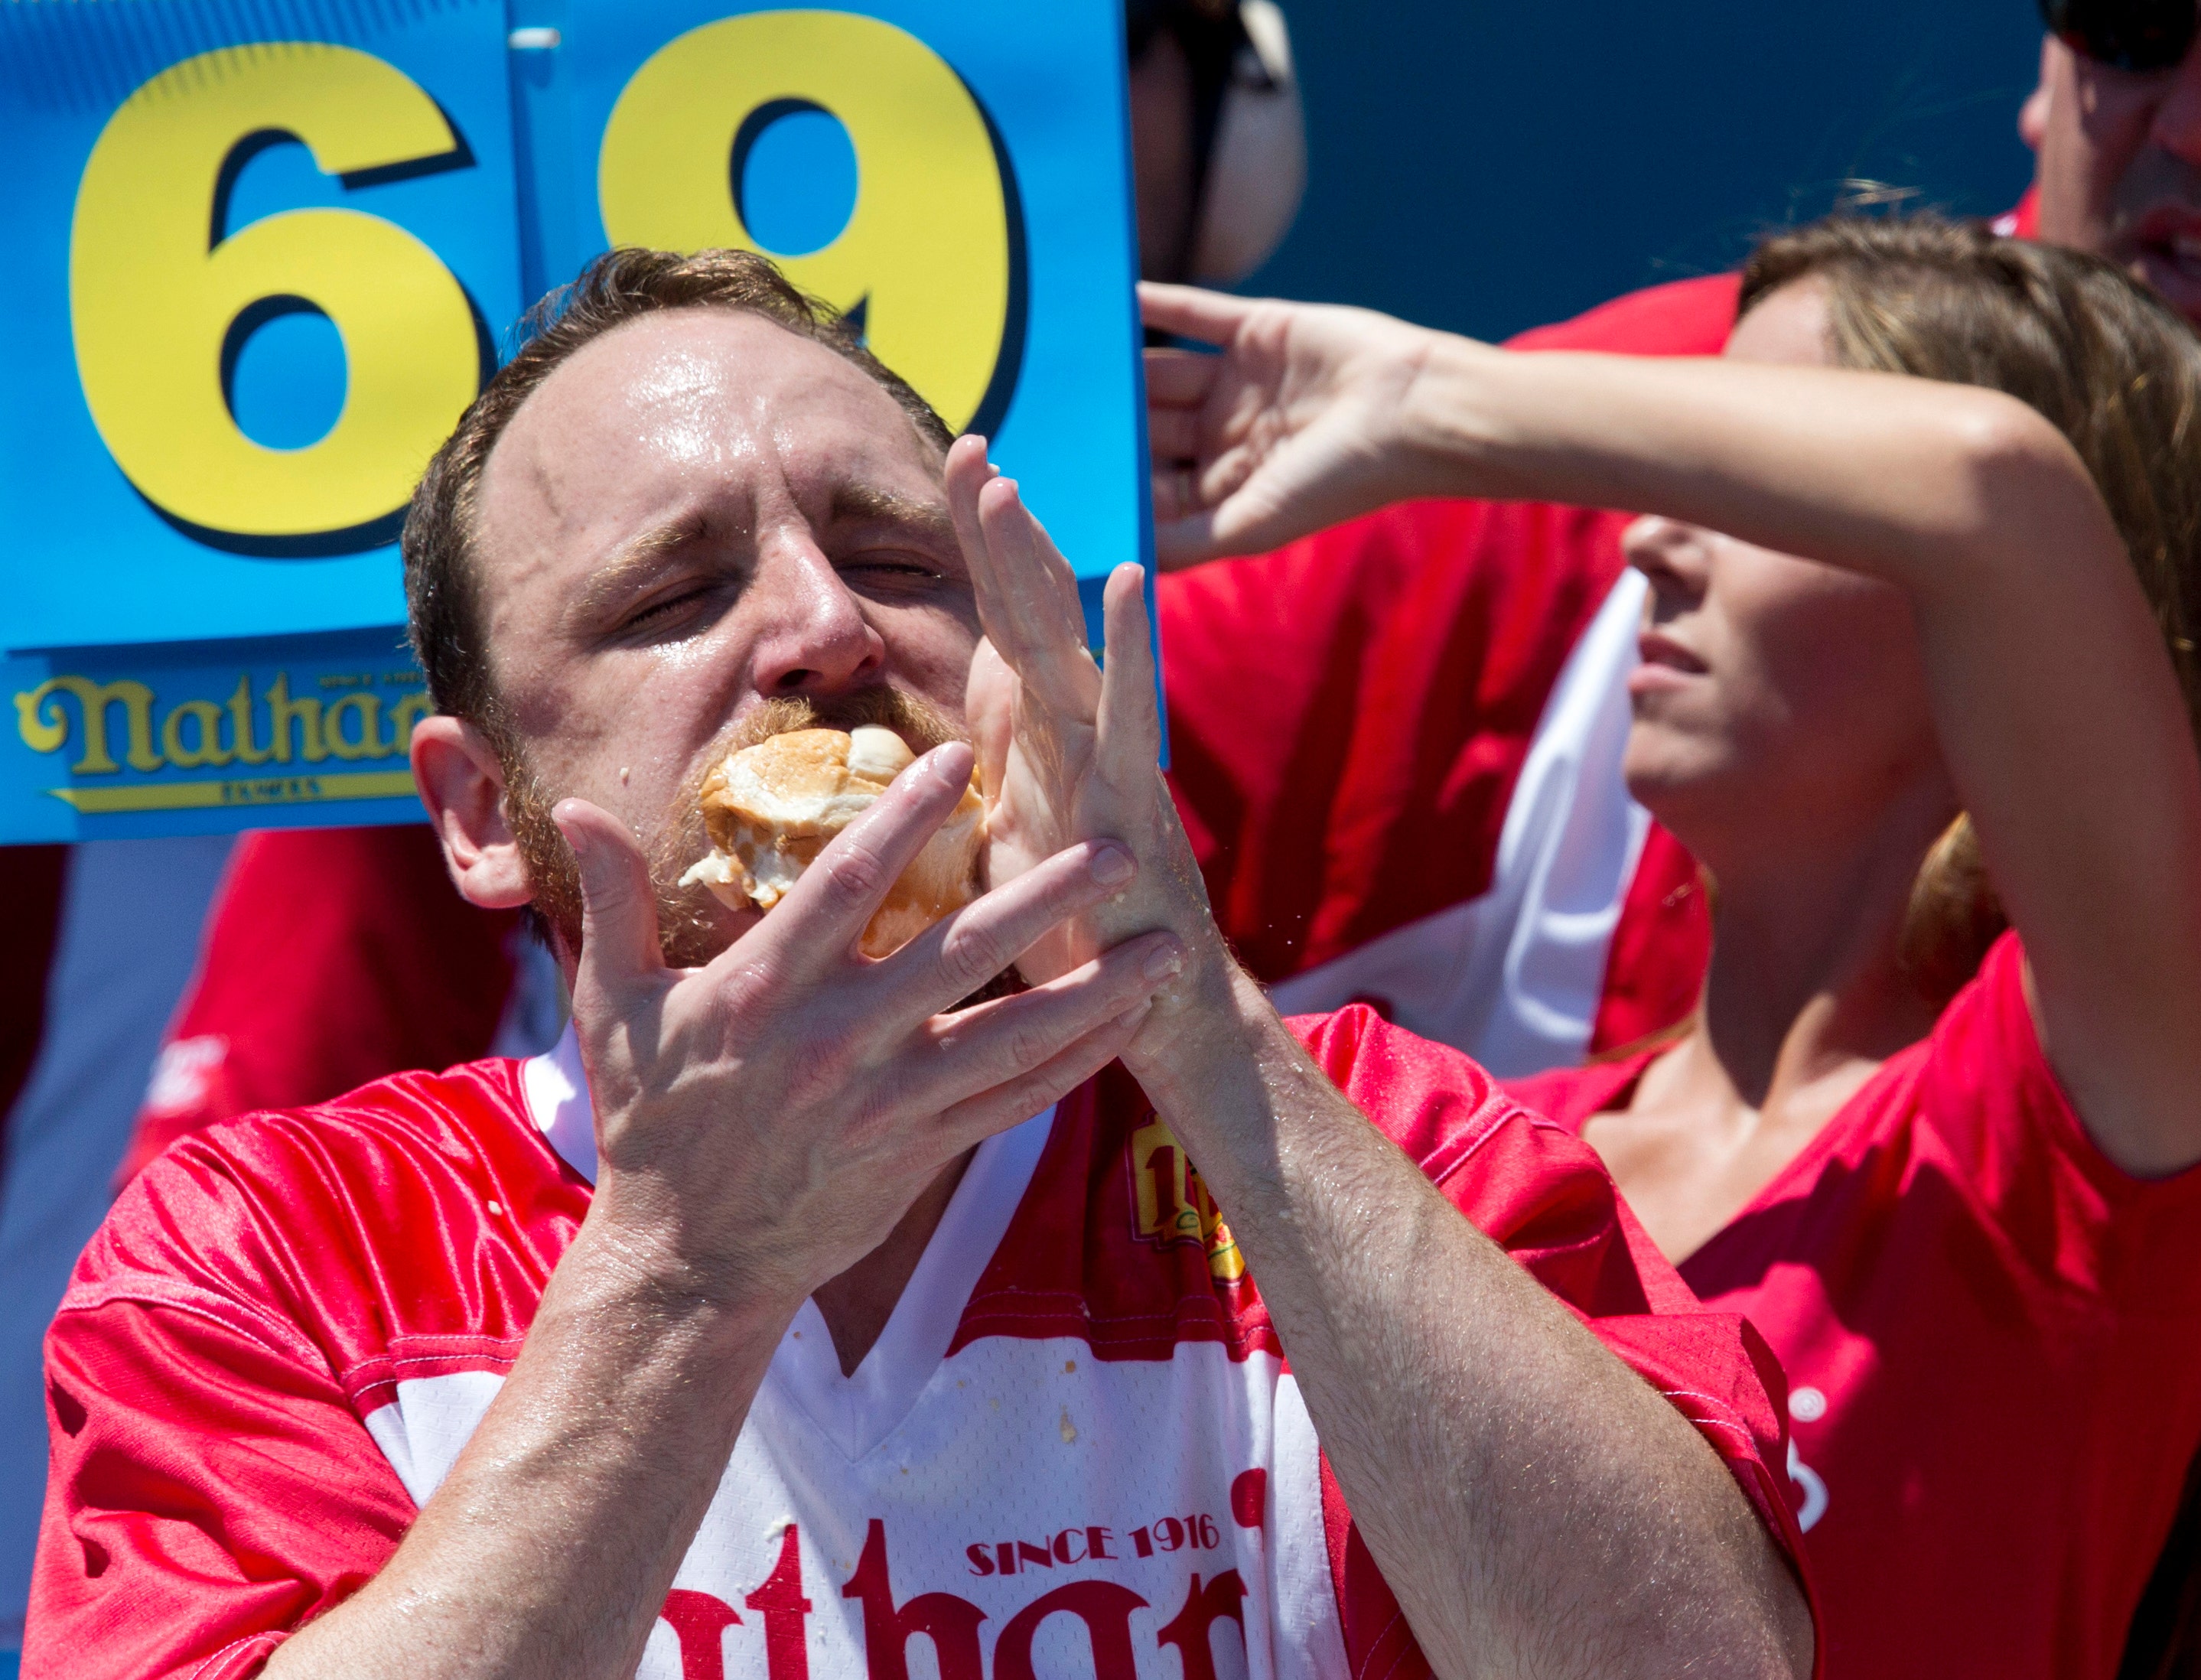 Joey Chestnut celebrates National Chicken Finger Day by going for Raising Cane's record for deep-fried fowl